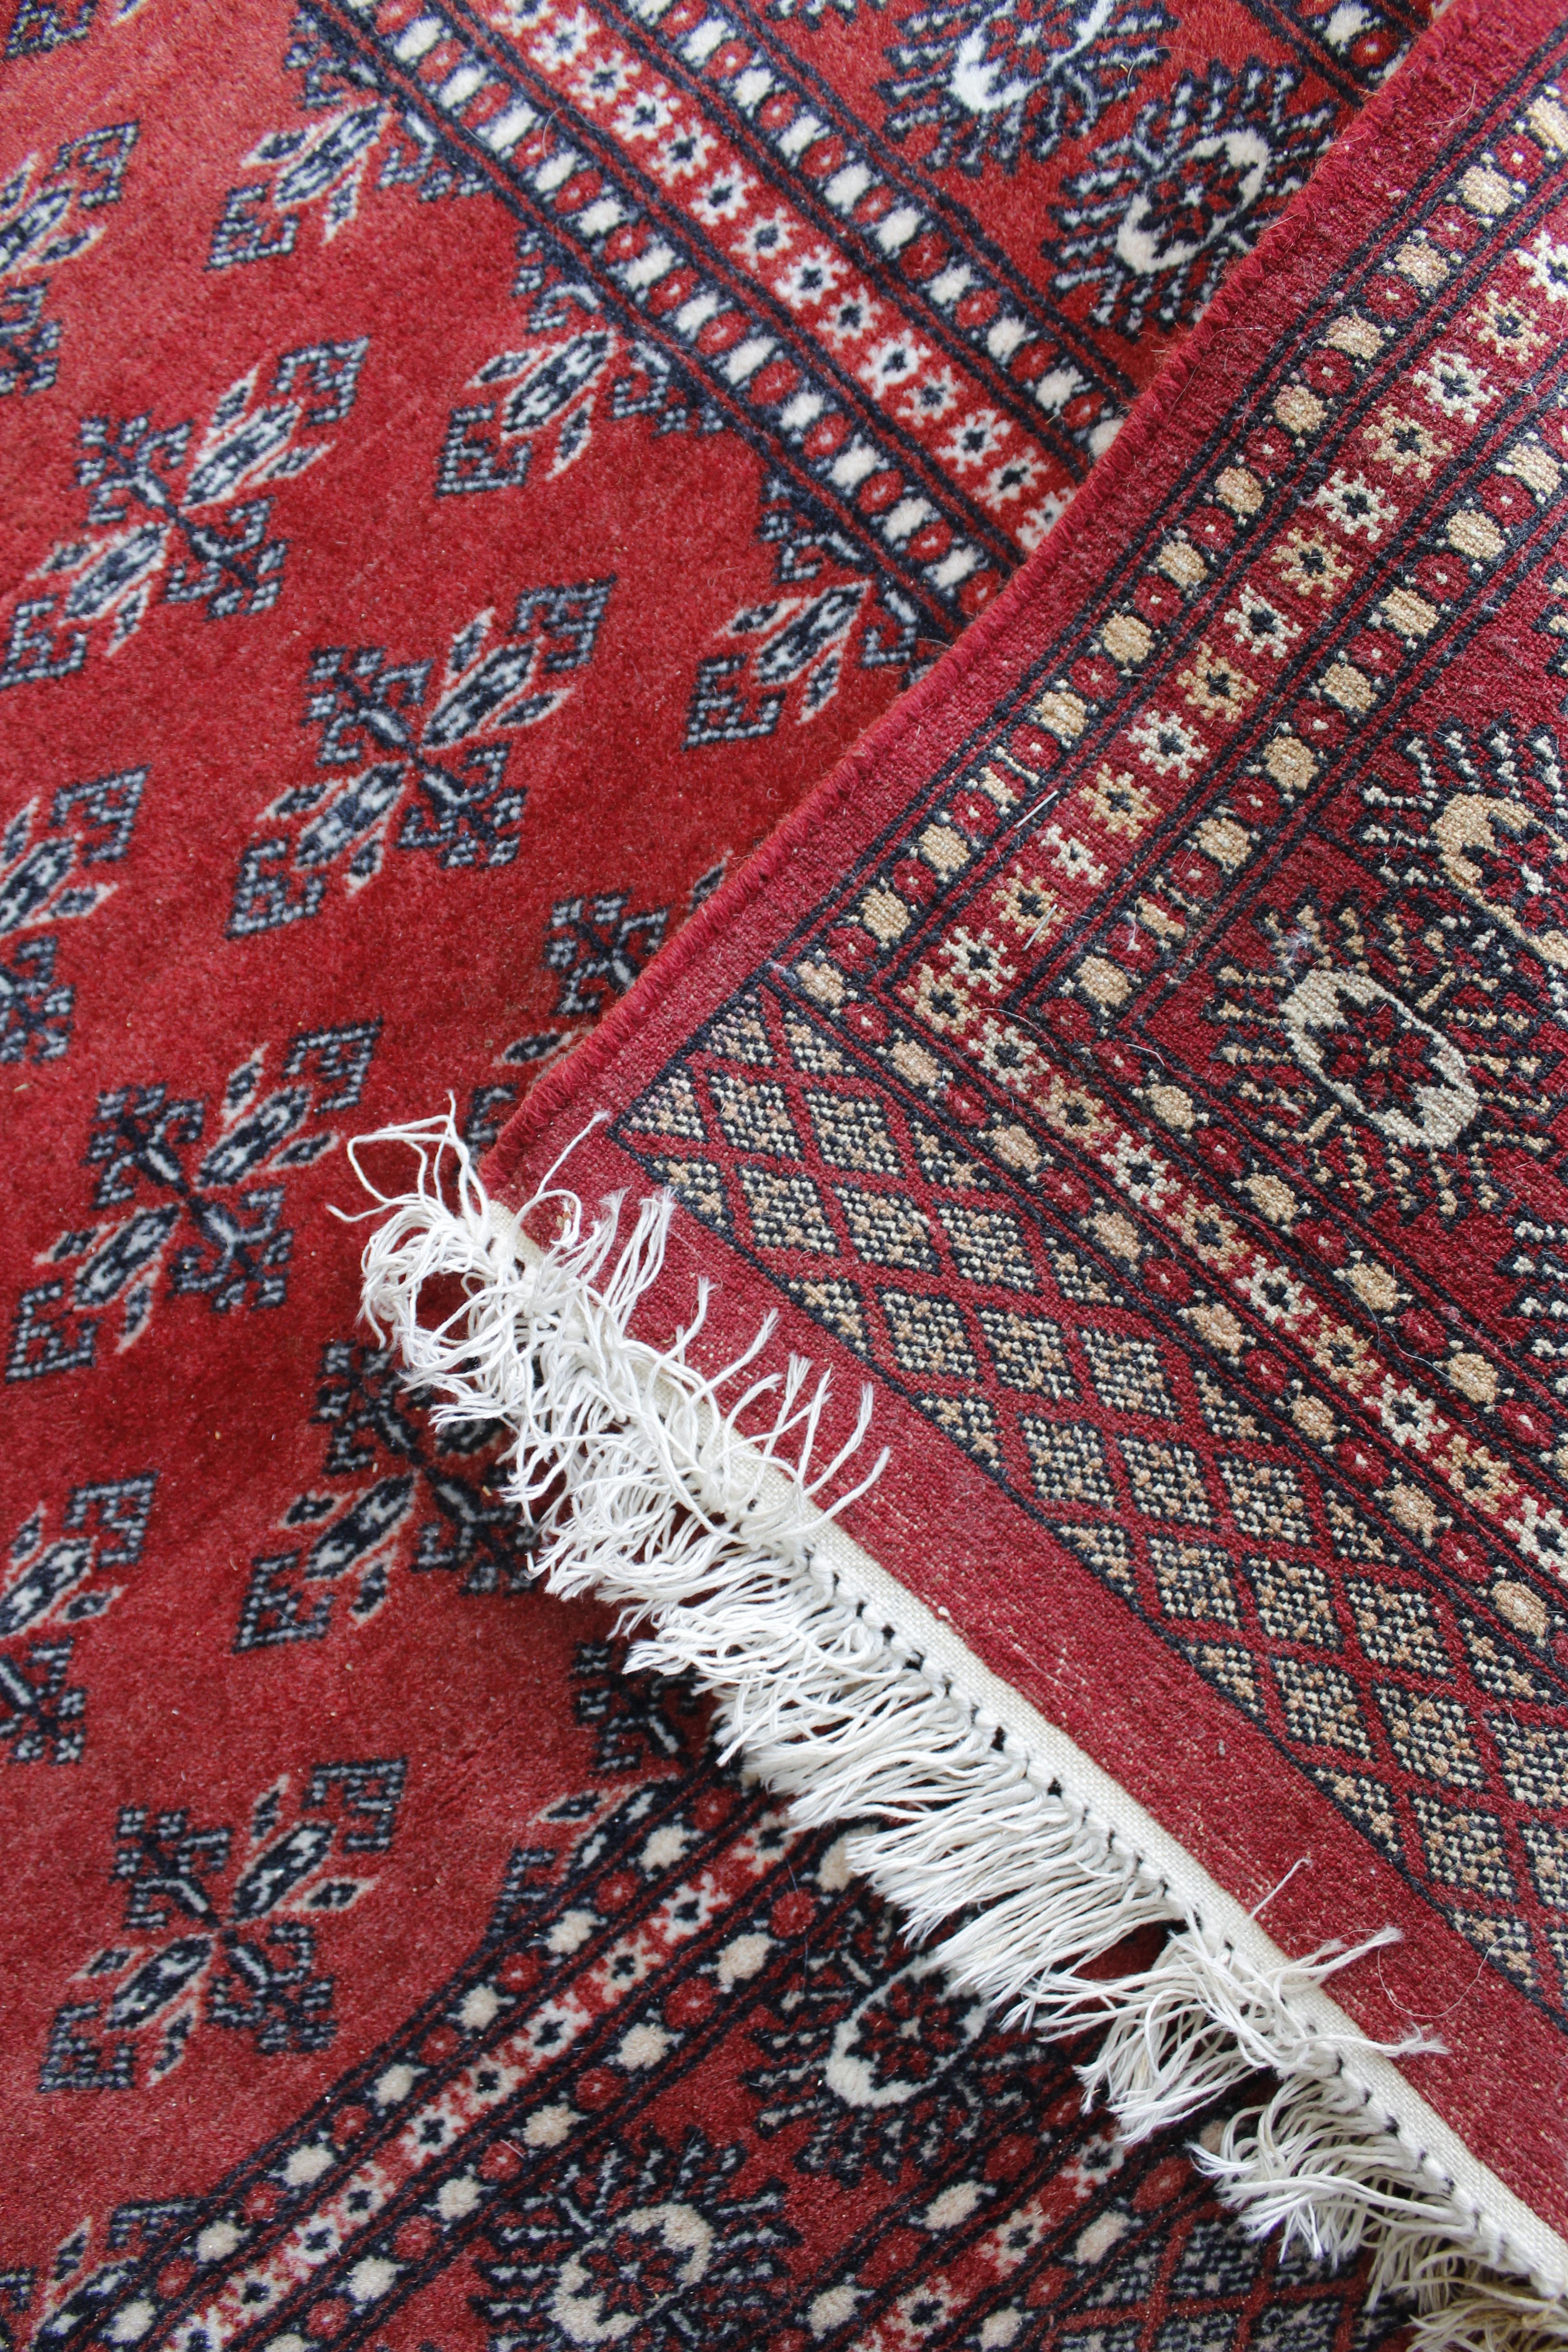 An approx. 5'6" x 3'2" red patterned rug AF - Image 3 of 3